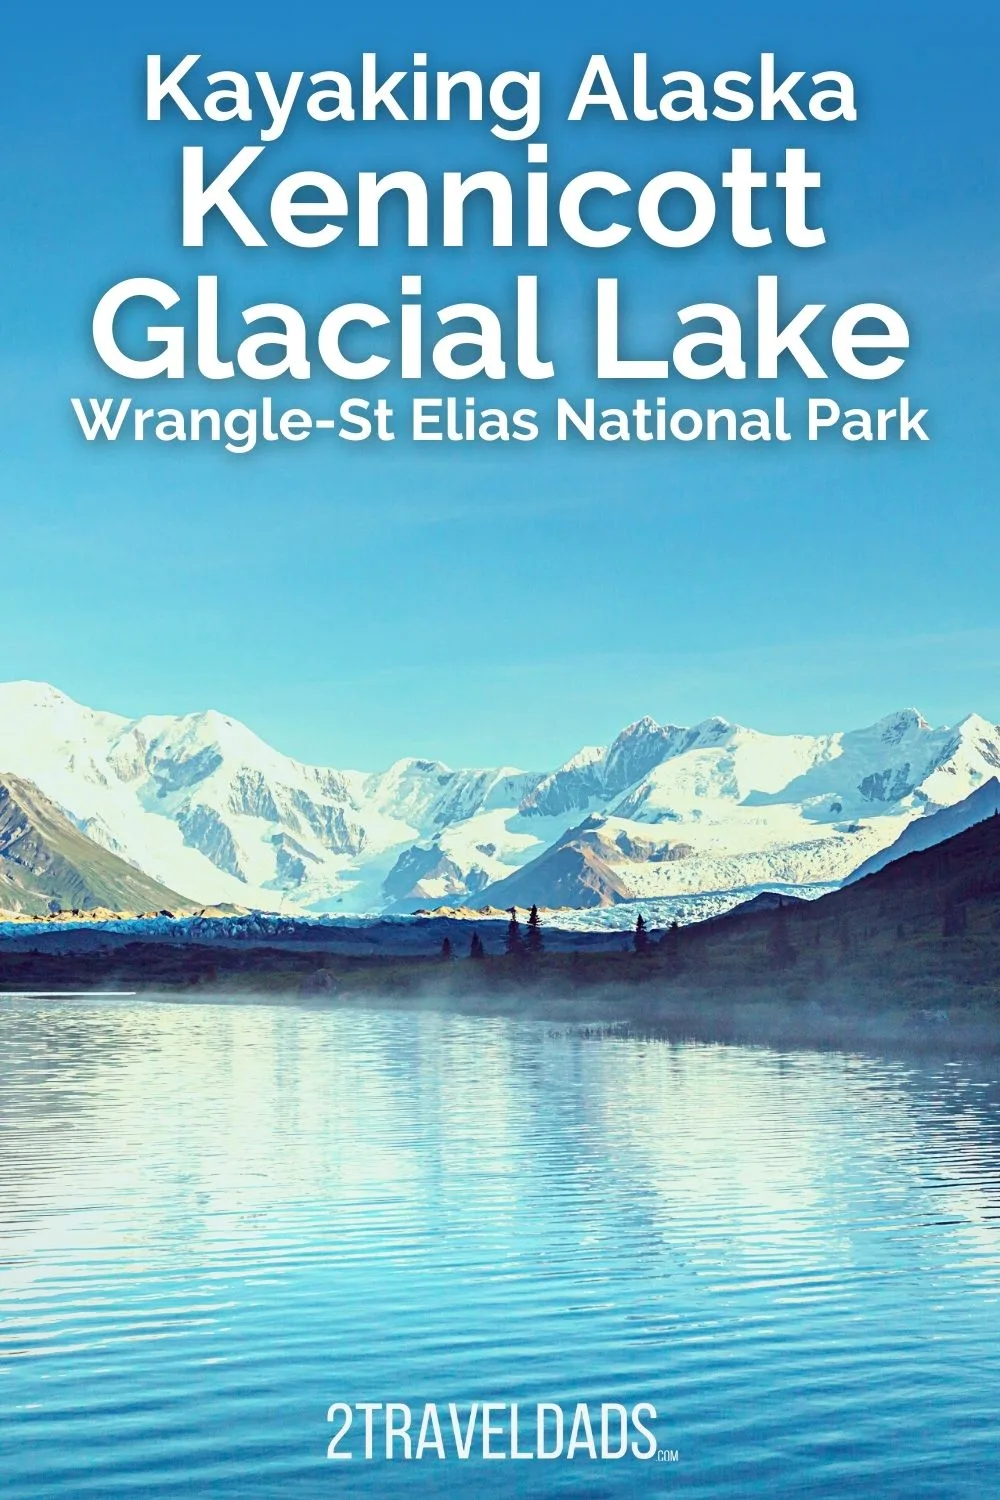 Kayaking at the Kennecott glacial lake at Wrangle-St Elias National Park is an other-worldly kayaking experience. See what to expect, how to plan for it, and who to go with for kayaking in this unique National Park.